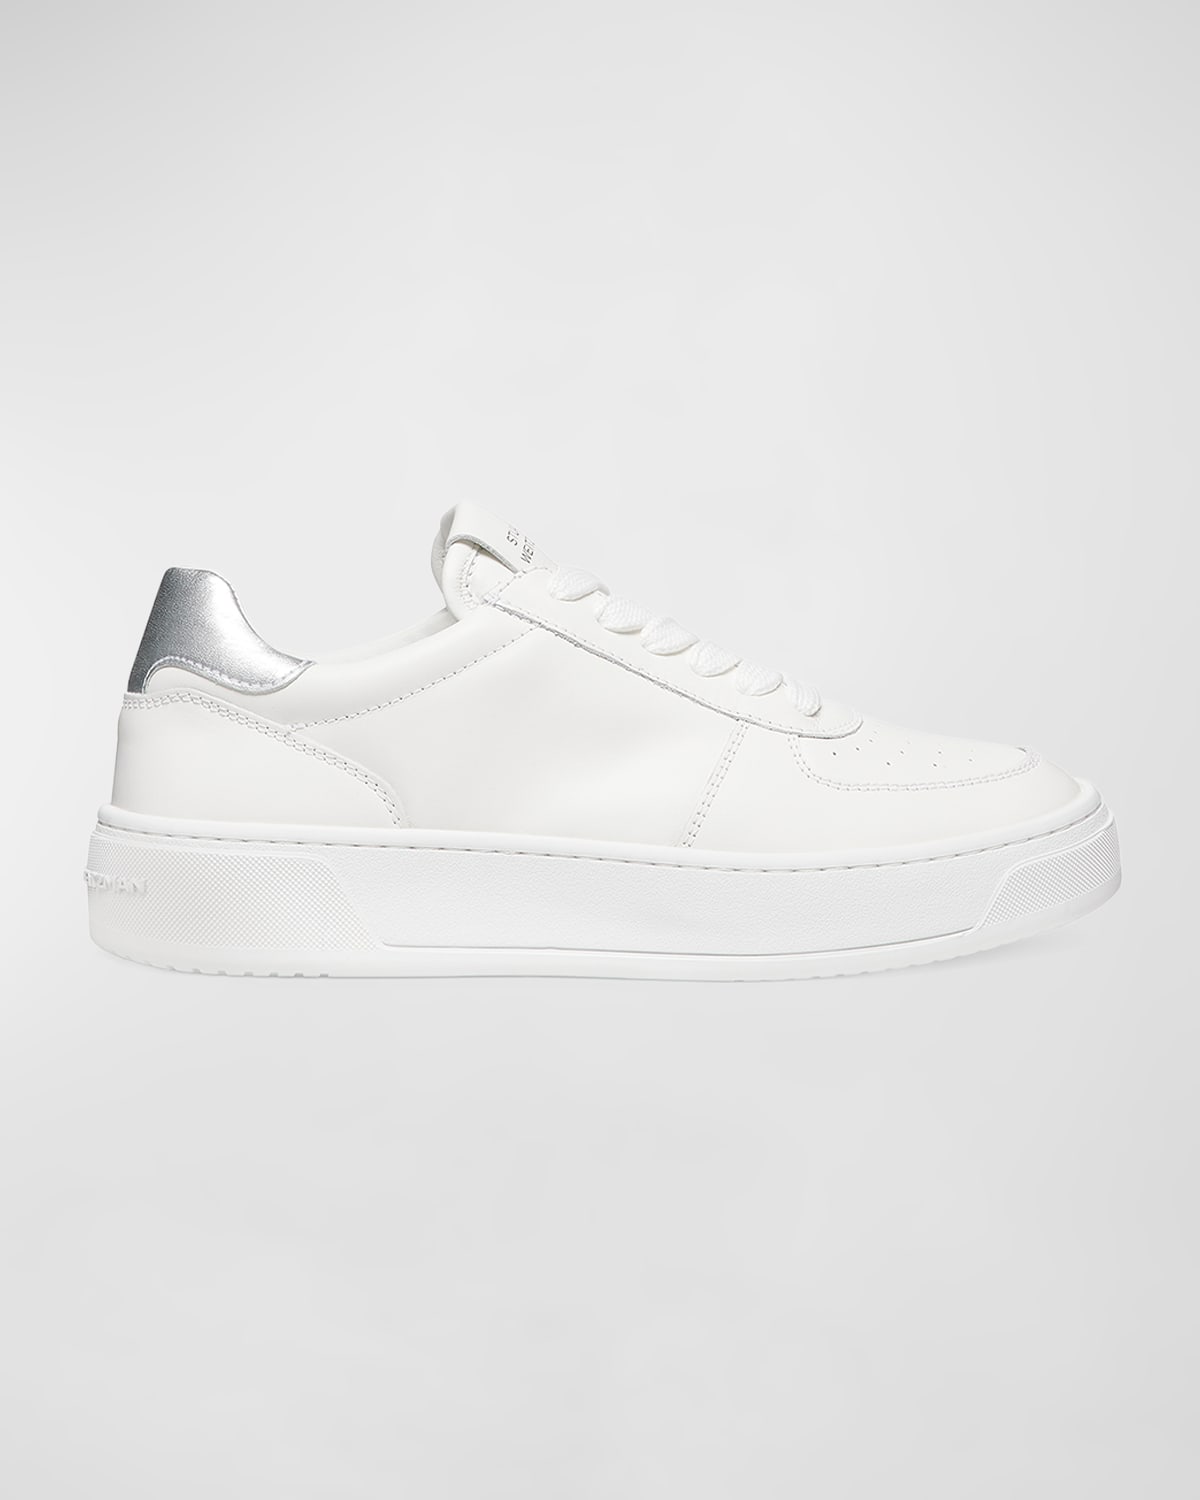 Stuart Weitzman Women's Sw Courtside Lace Up Low Top Sneakers In White/silver